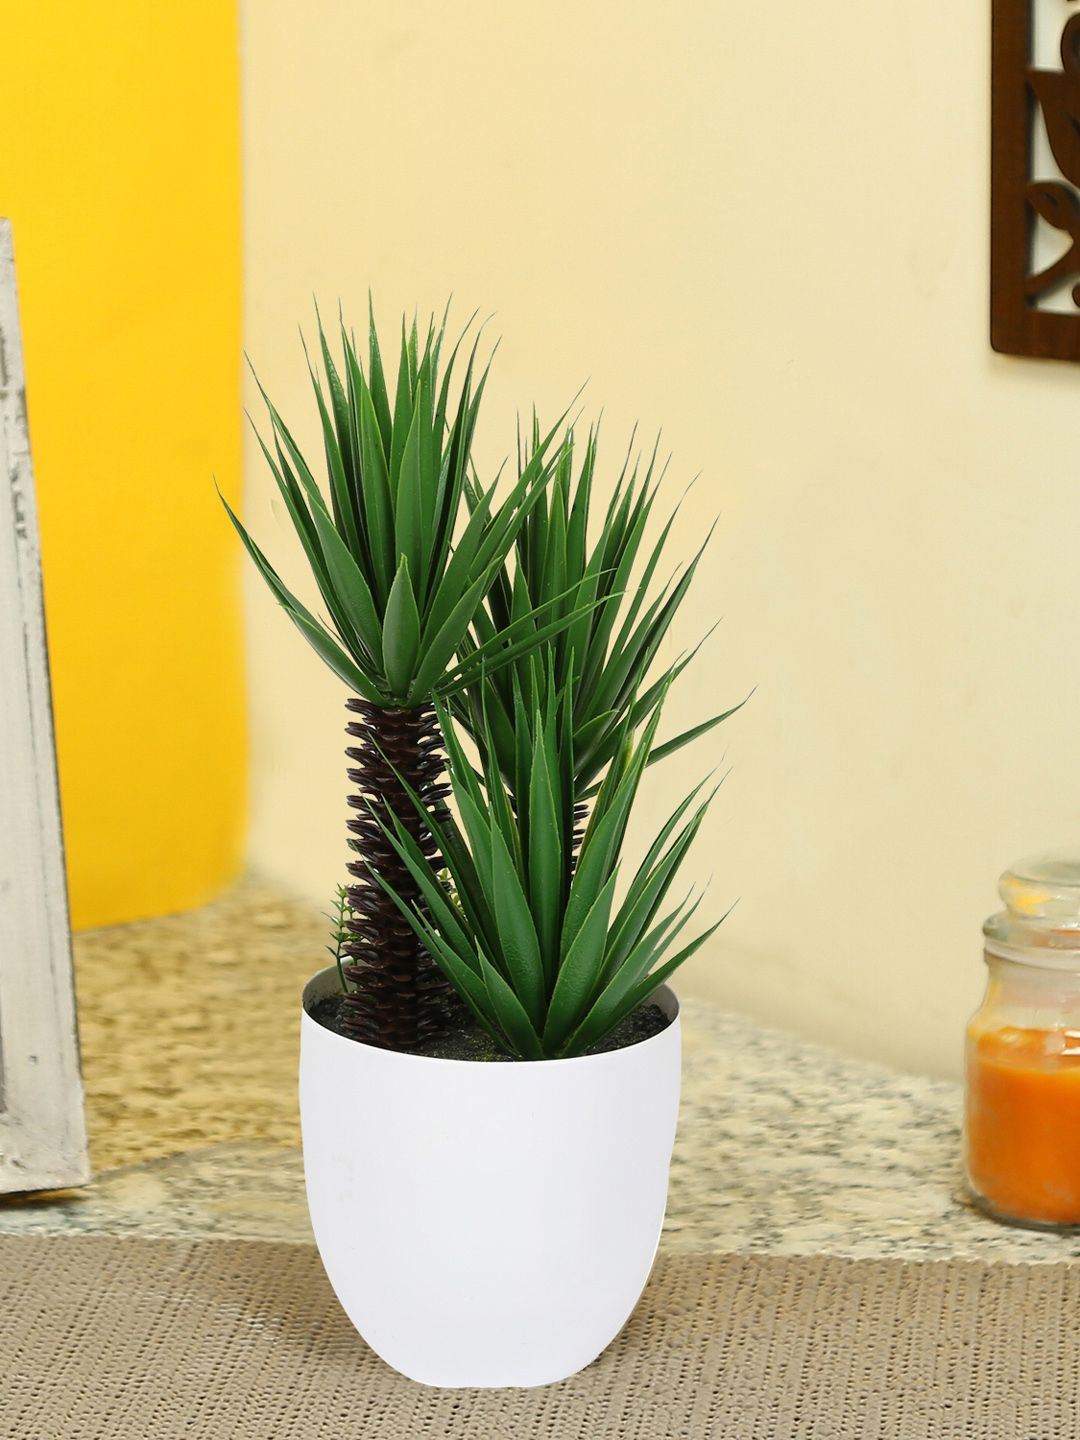 Aapno Rajasthan Green Artificial Plant with ABS Plastic Pot Price in India